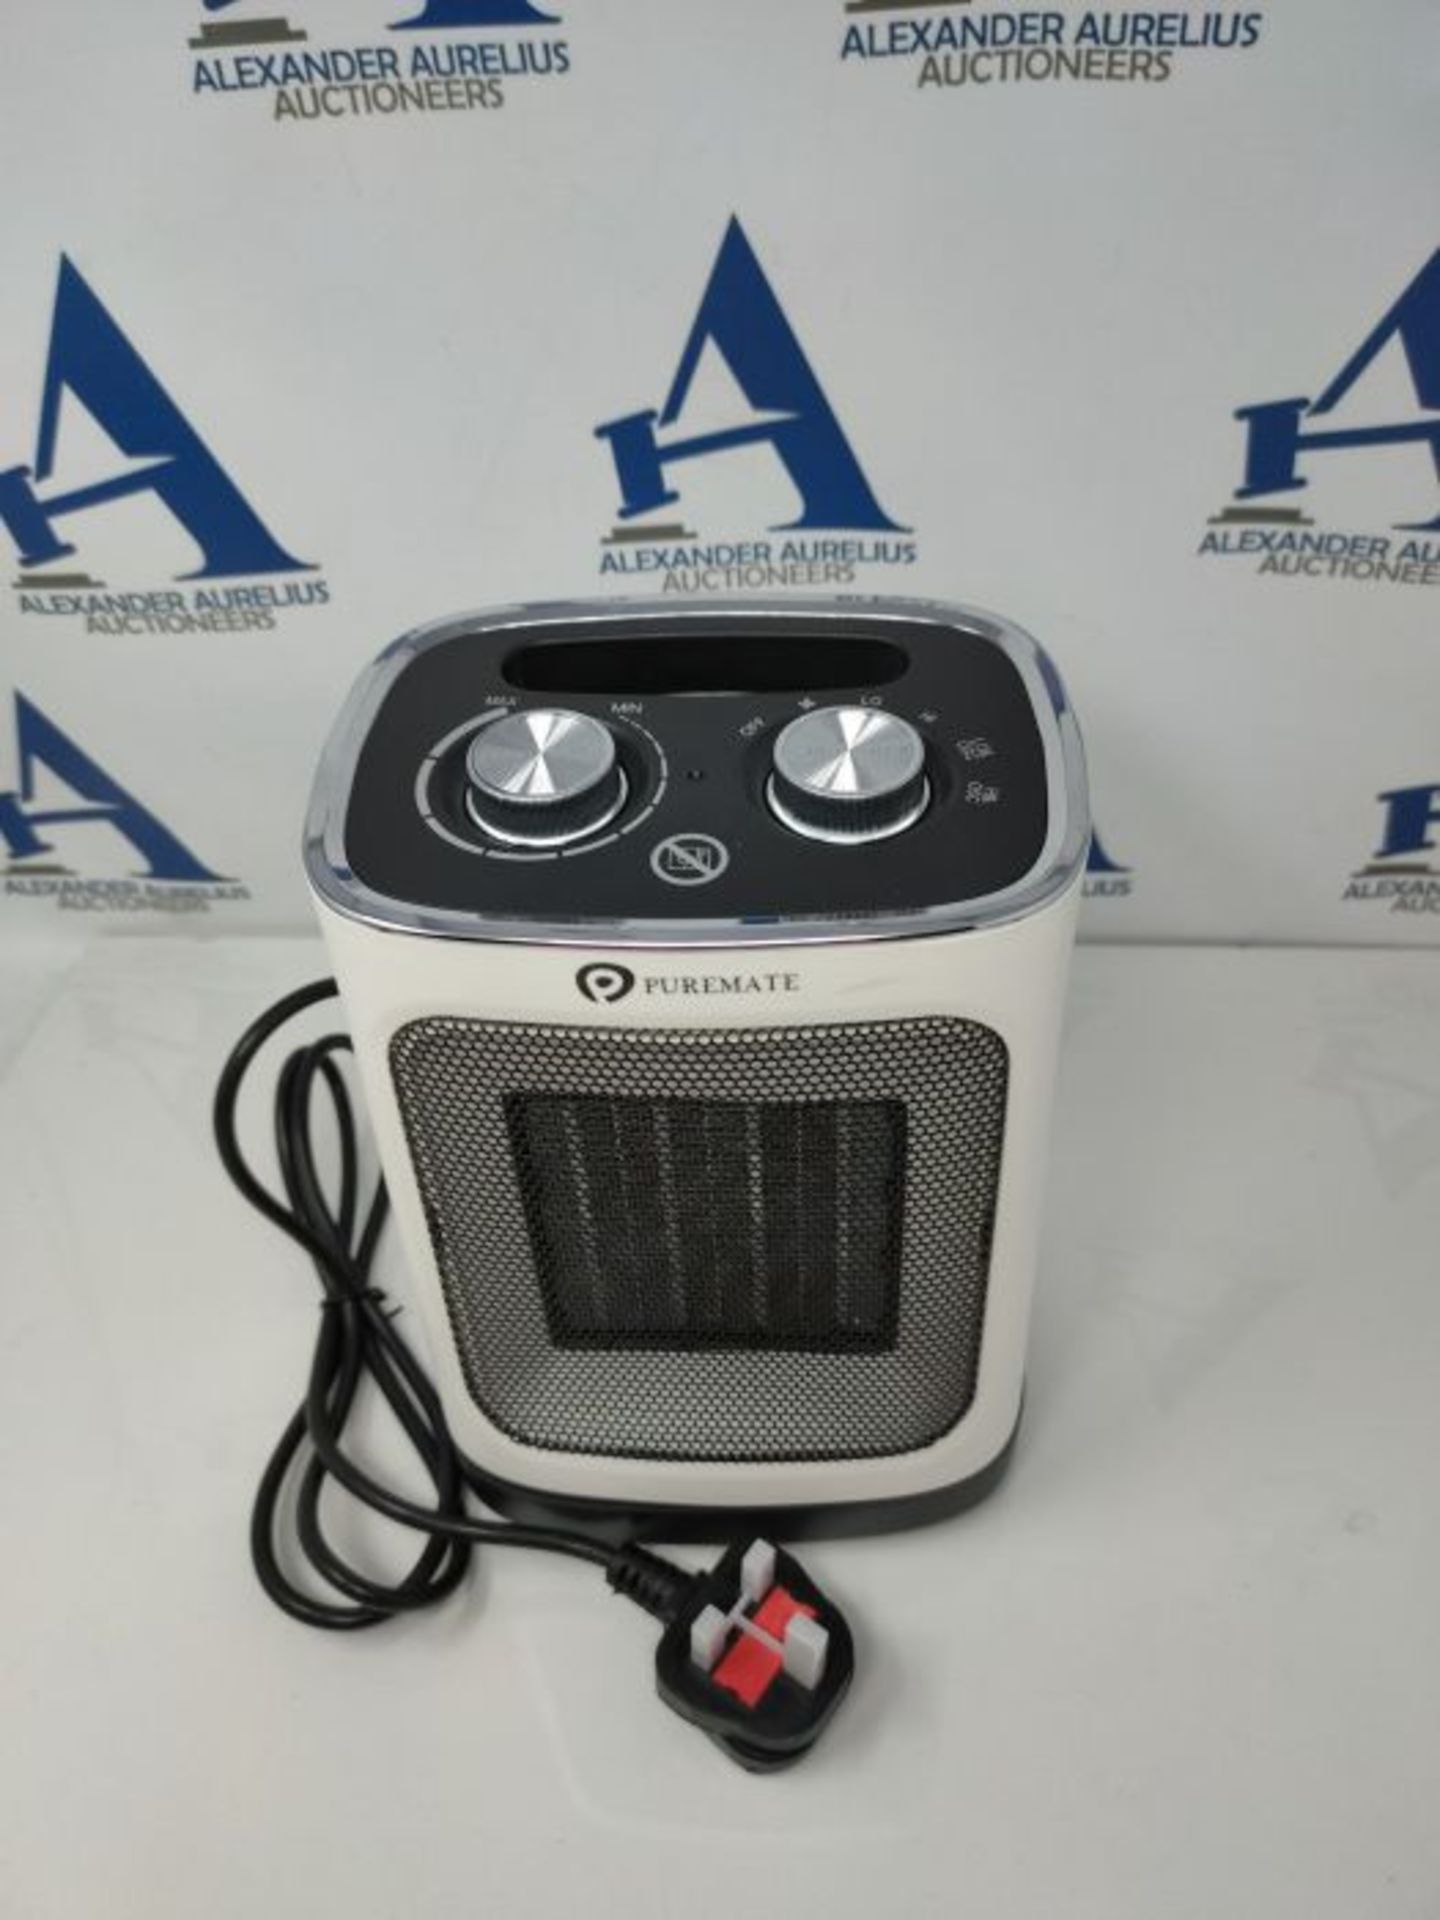 RRP £97.00 QHYTL PureMate Ceramic Fan Heater, 1800W Portable Electric Heater with 2 Heat Settings - Image 3 of 6